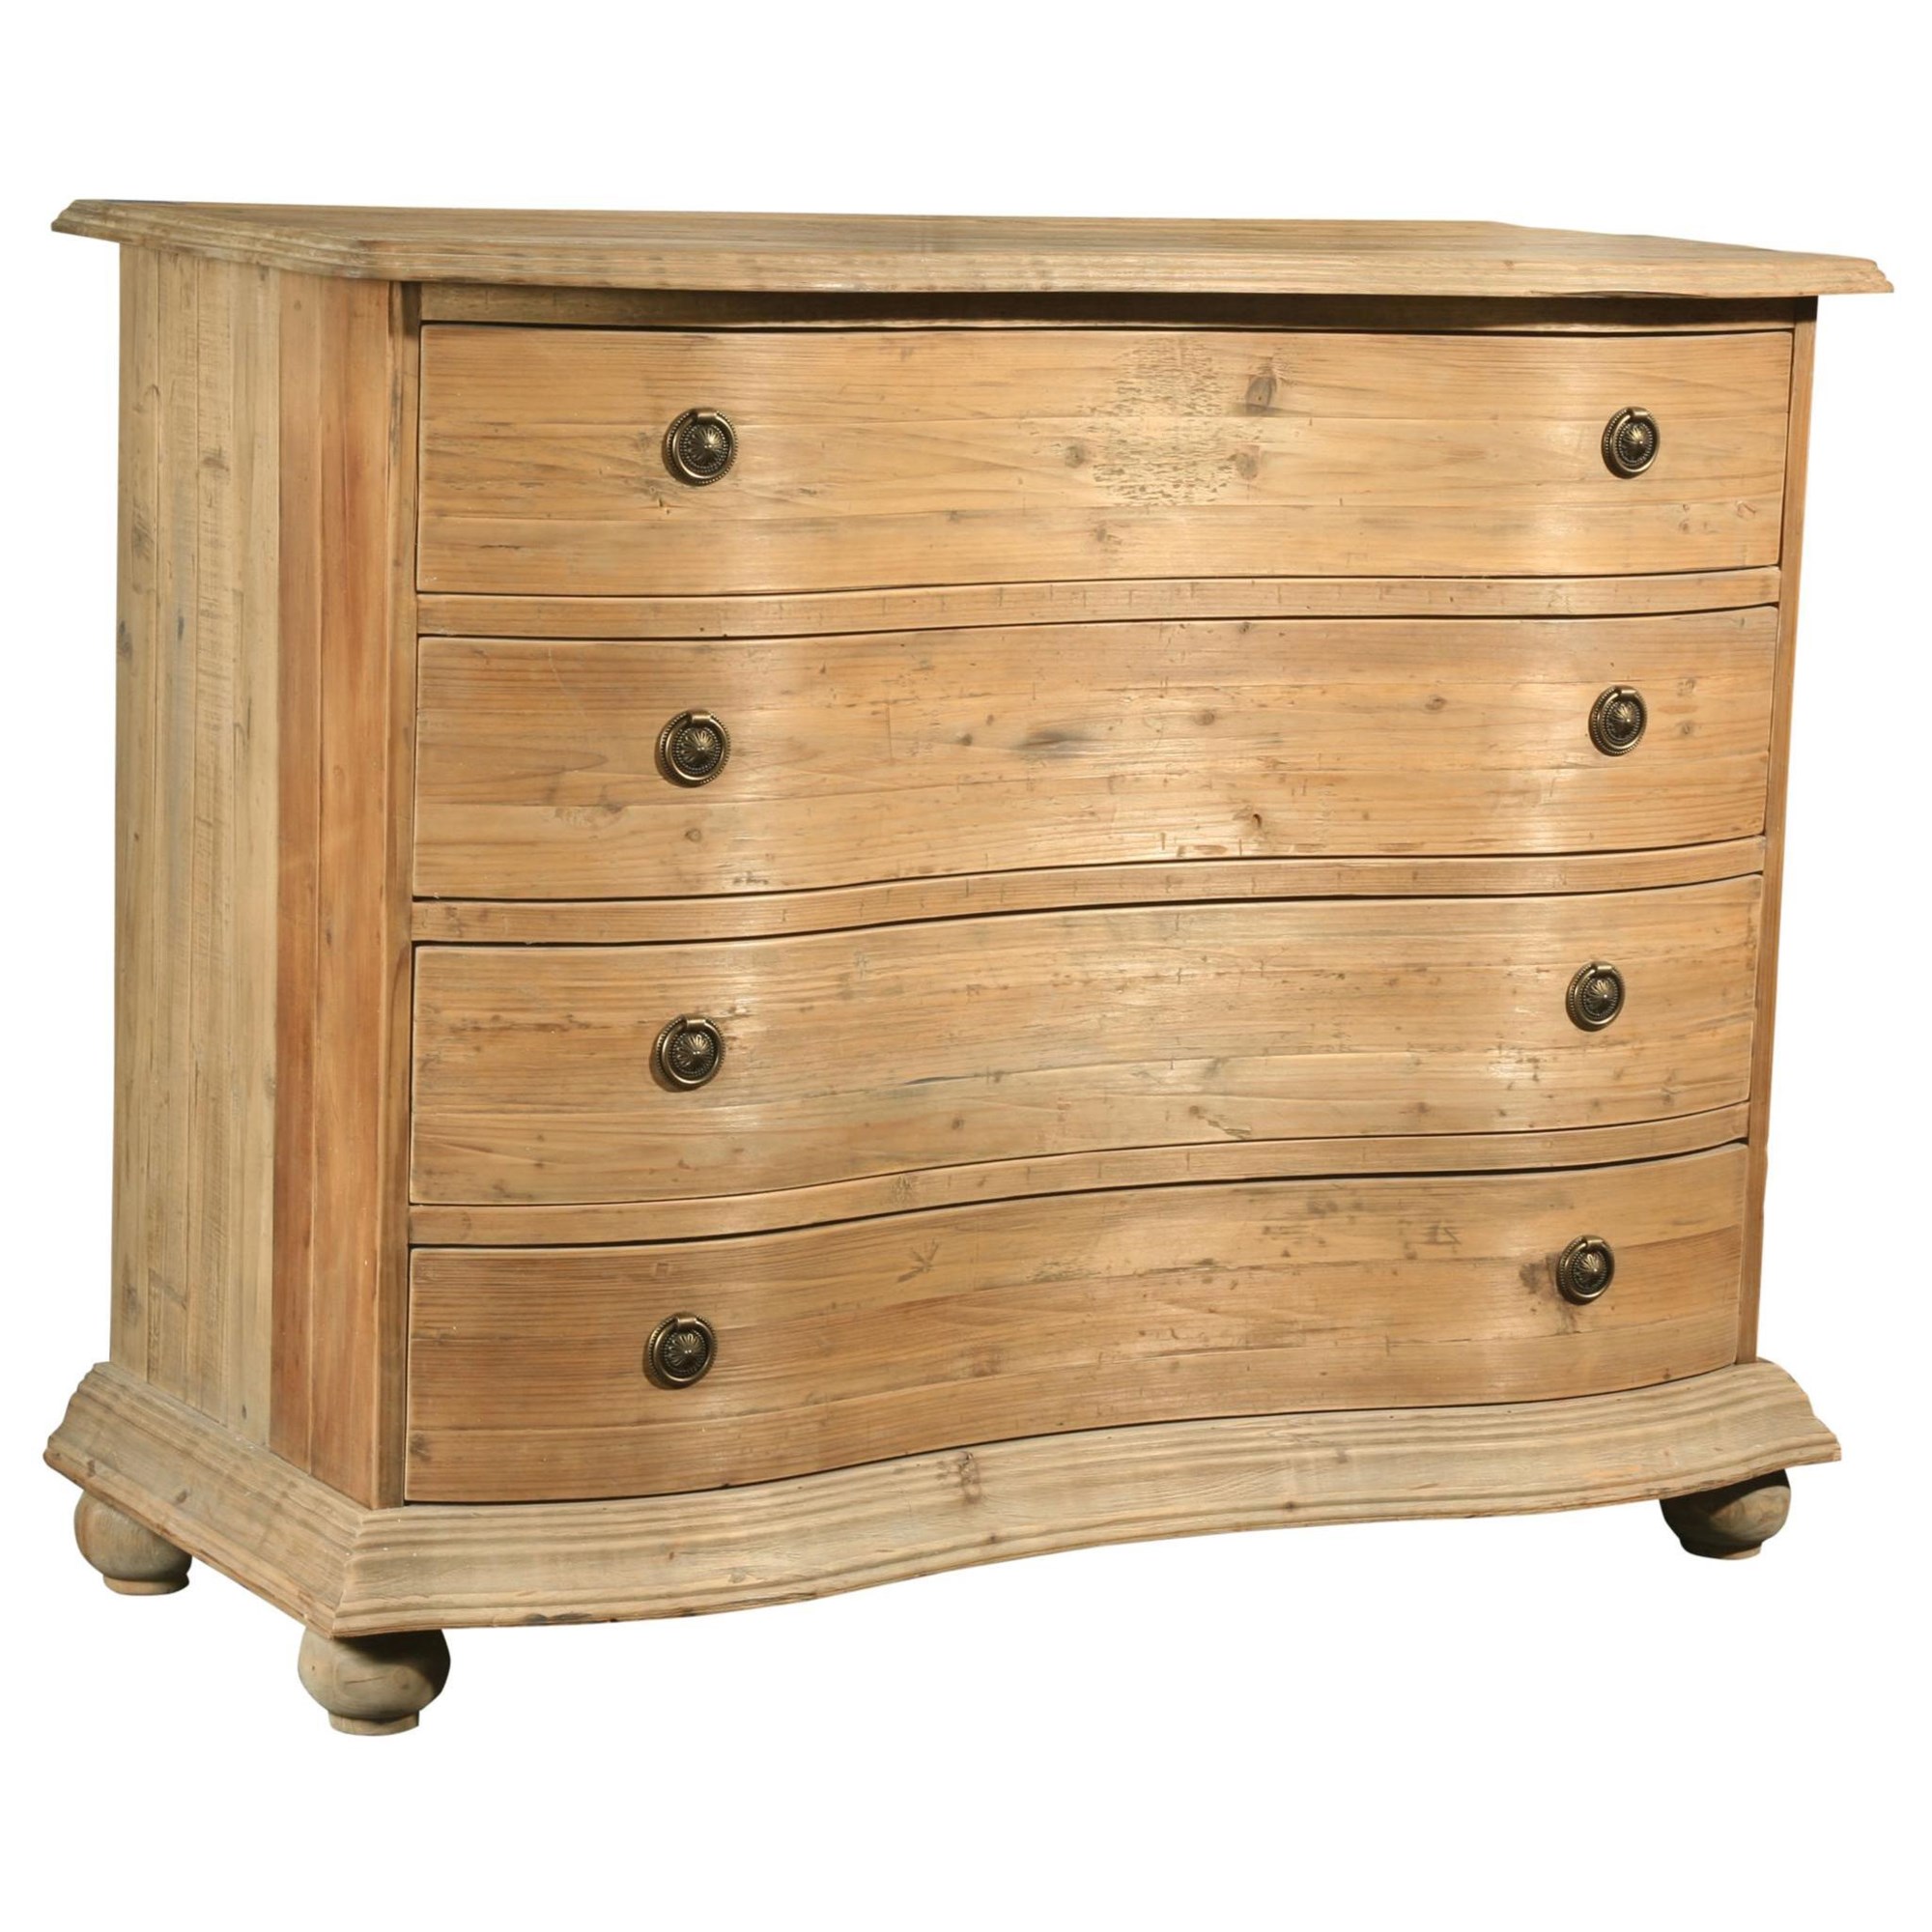 Furniture Classics 84224 Small Apothecary Chest